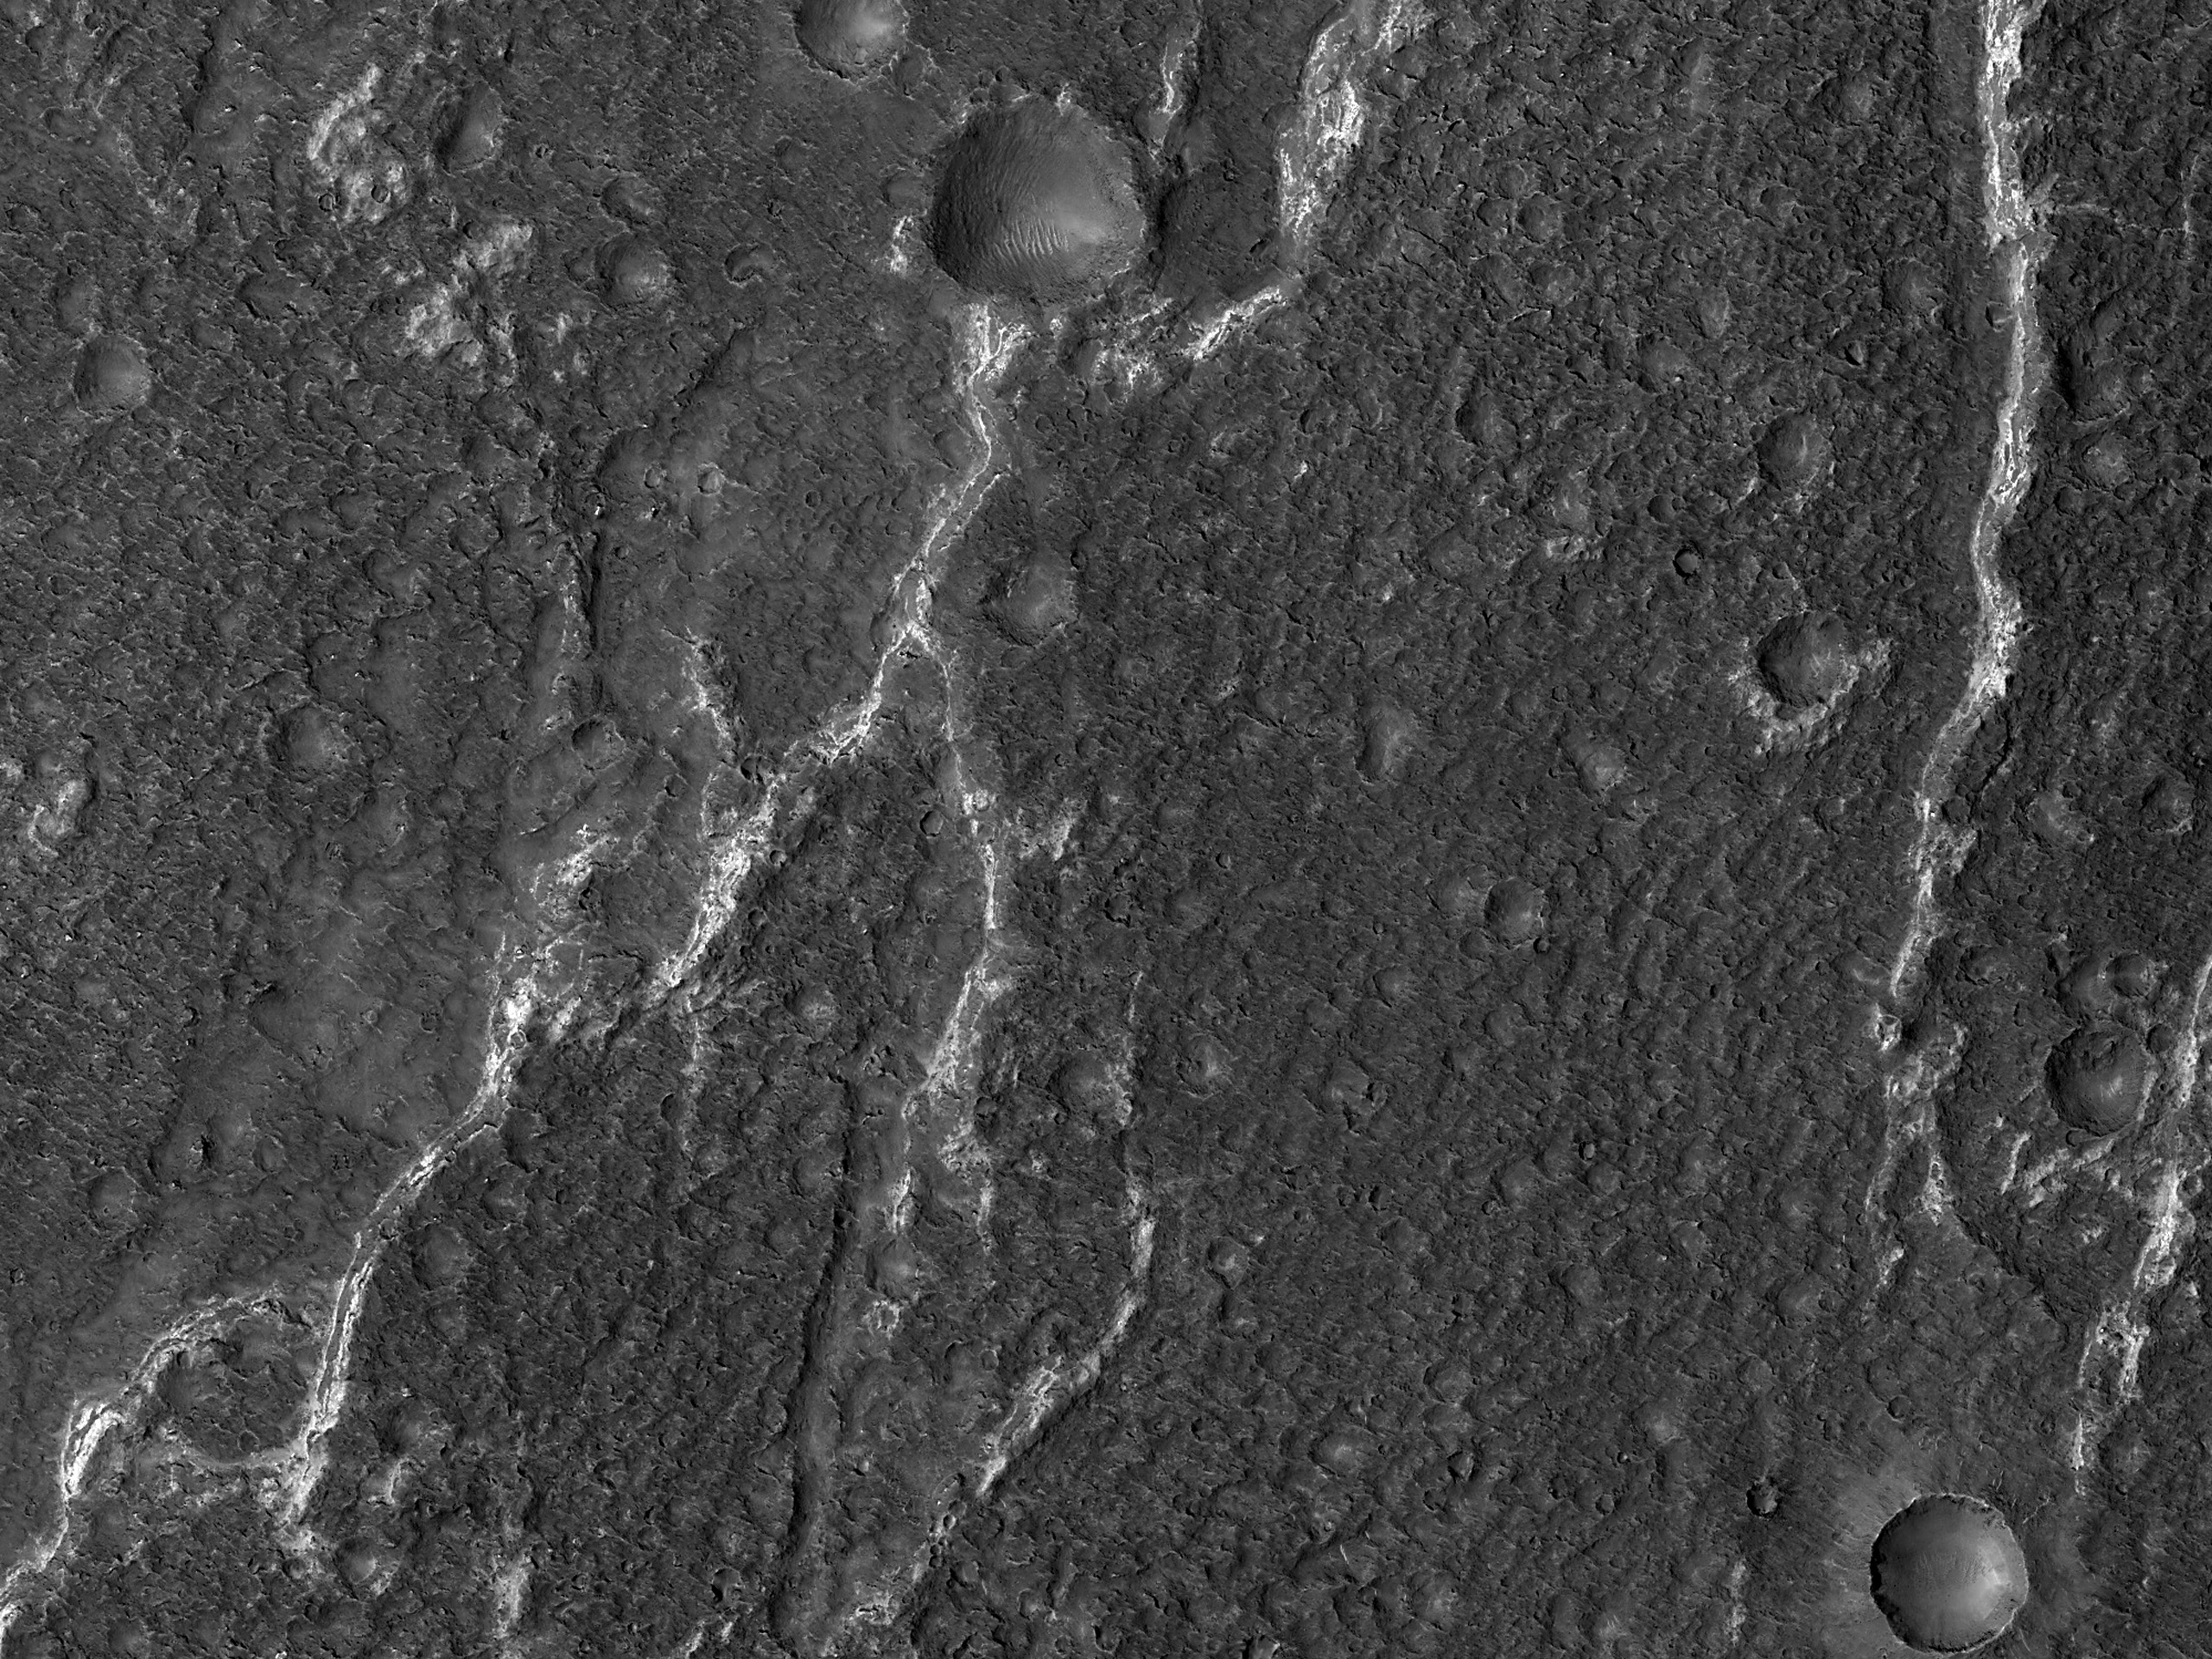 Layers in Columbus Crater